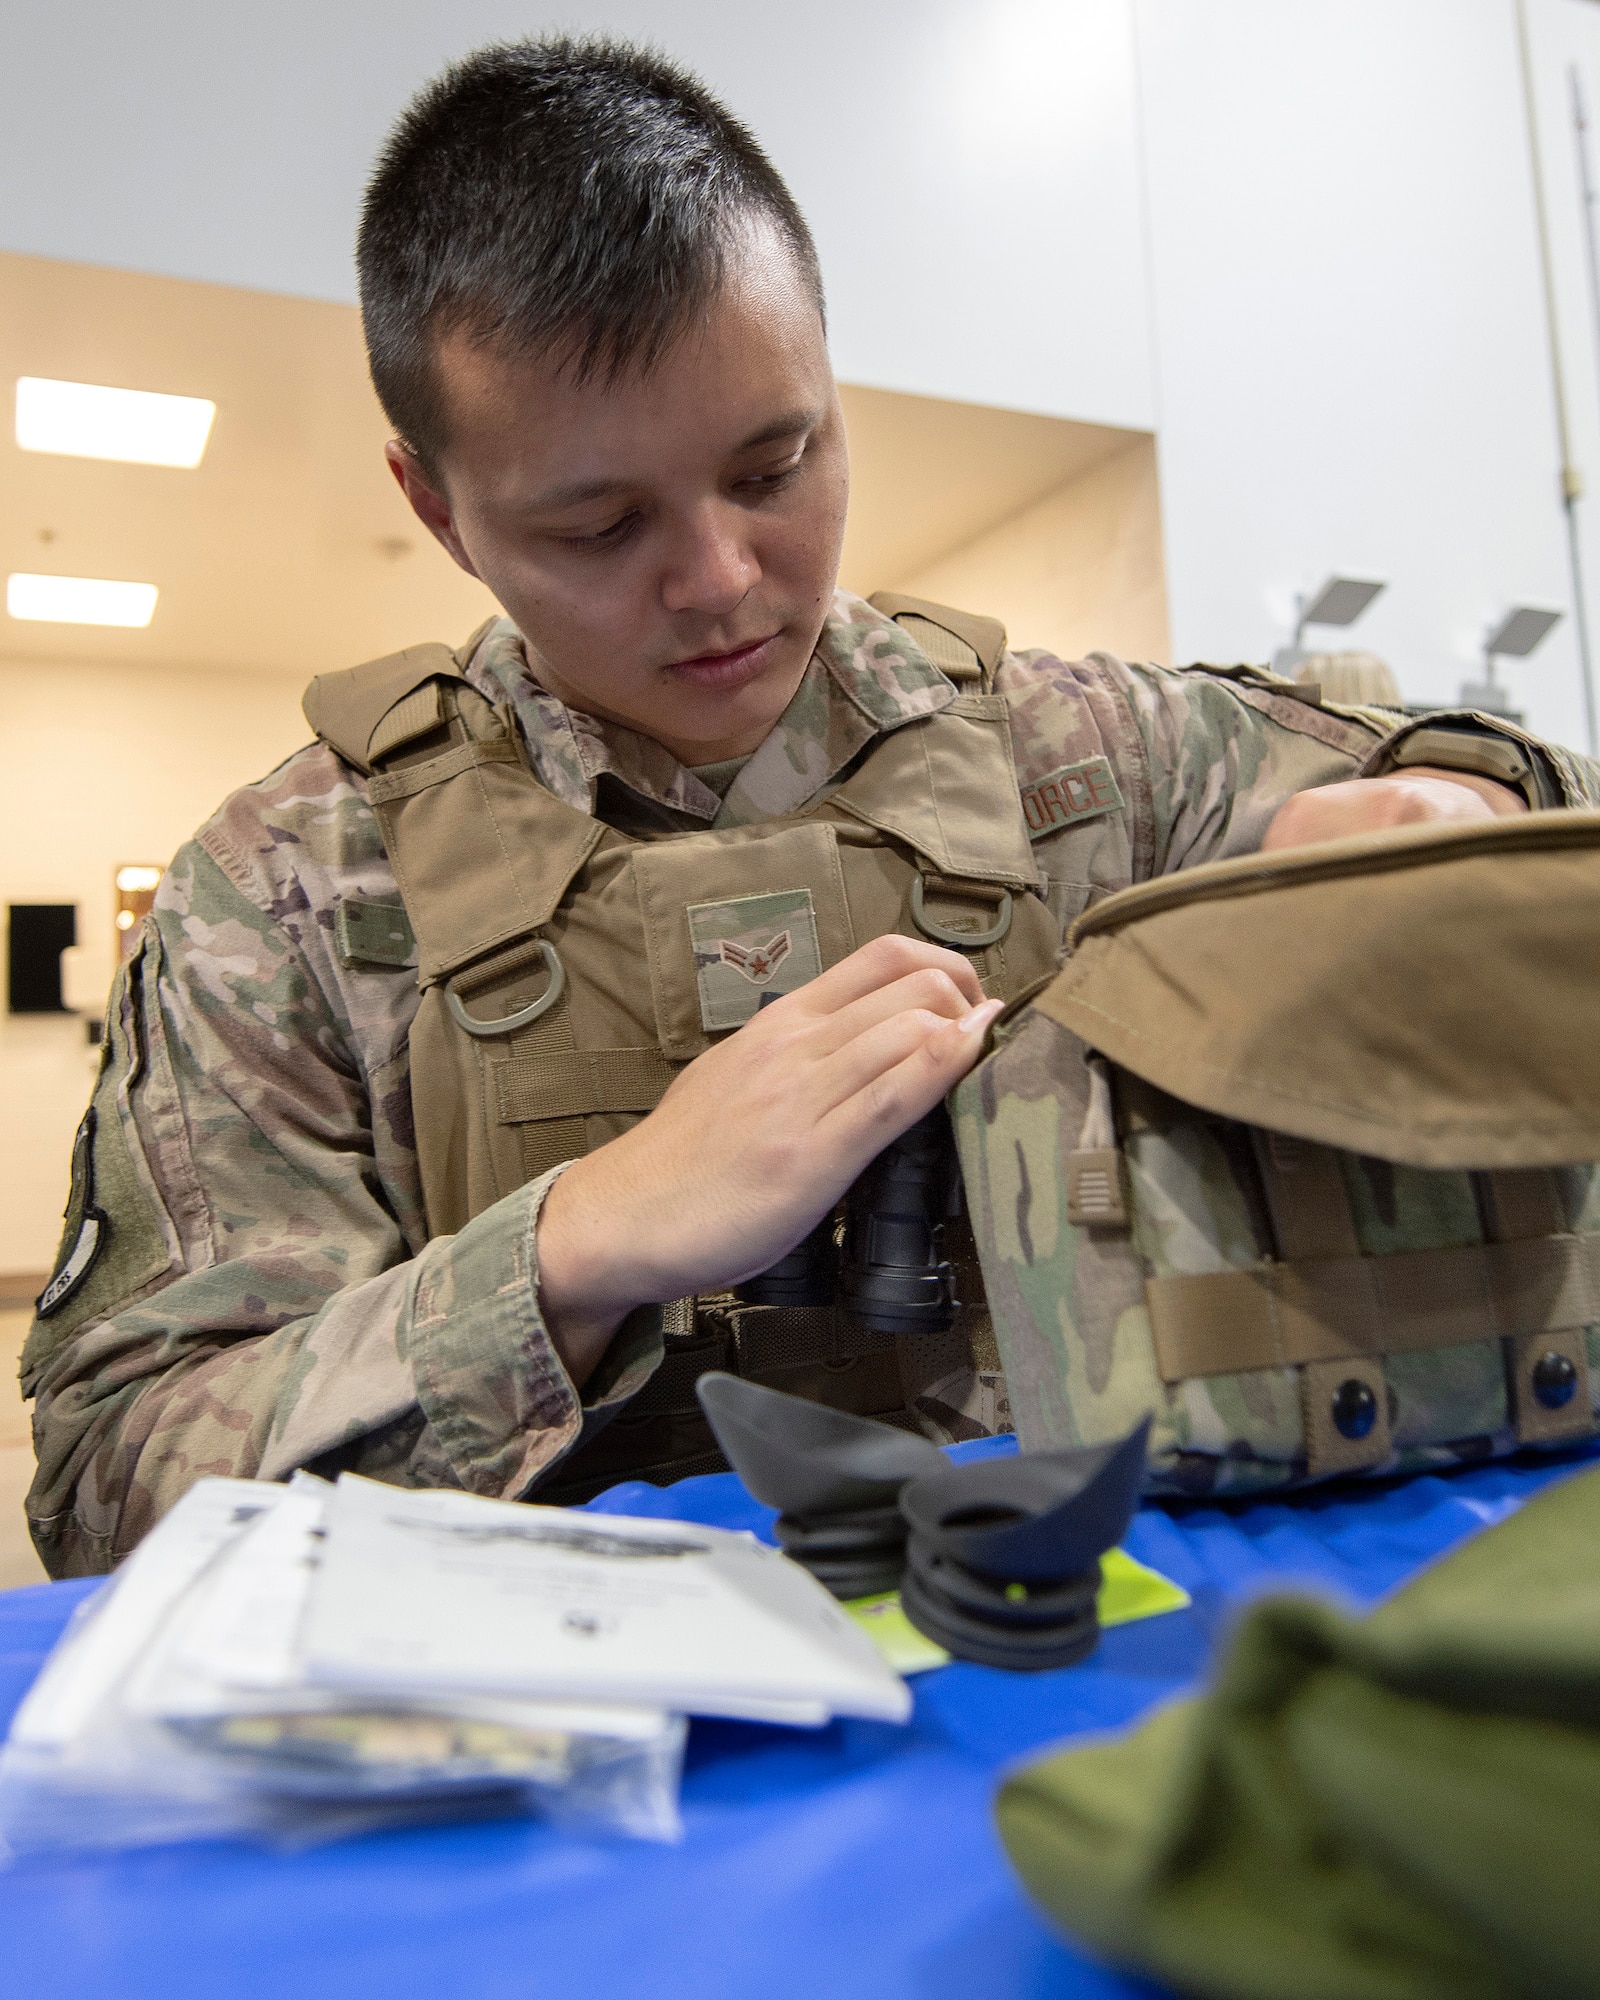 U.S. Air Force Airman 1st Class Tai Tjing Quiton, 321st Contingency Response Squadron fire team member, checks his gear during deployment processing Sept. 14, 2019, at Travis Air Force Base, California. Contingency response forces from the U.S. and Royal Australian Air Forces staged at Travis AFB before deploying in support of exercise Mobility Guardian 2019. MG19 is Air Mobility Command’s flagship exercise for large-scale rapid global mobility operations. Forty-six U.S. aircraft will join aircraft from 29 international partners, along with more than 4,000 U.S. and international Air Force, Army, Navy and Marine Corps aviators. (U.S. Air Force photo by Louis Briscese)